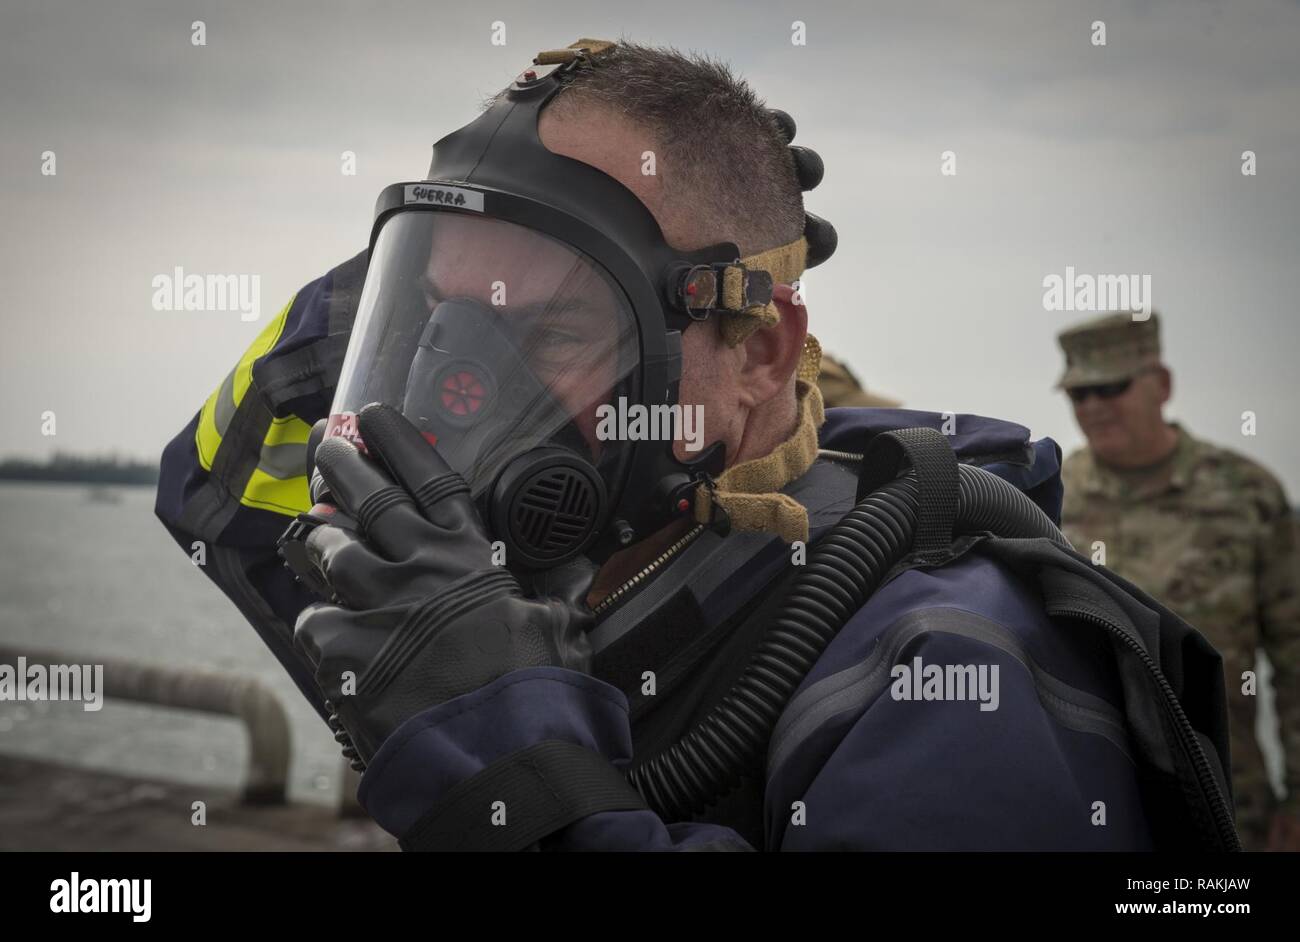 David Guerra, Miami-Dade Fire Rescue air rescue flight medic, dons an oxygen mask during a hazardous material decontamination exercise on the Port of Miami, Fla. Feb 18, 2017.The exercise was led by Miami-Dade Fire Rescue and U.S. Army North under the supervision of U.S. Northern Command and provided soldiers and first responders the unique experience of operating together in a major metropolitan city. Stock Photo